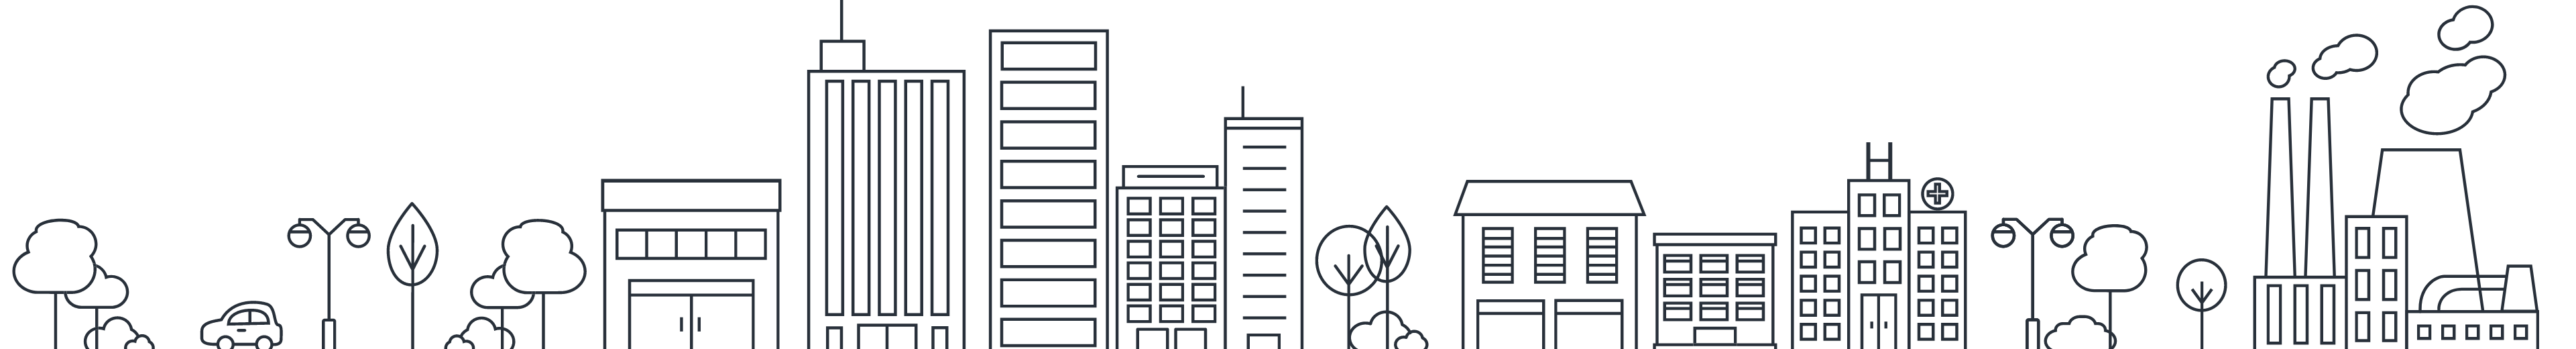 Graphic showing a city skyline